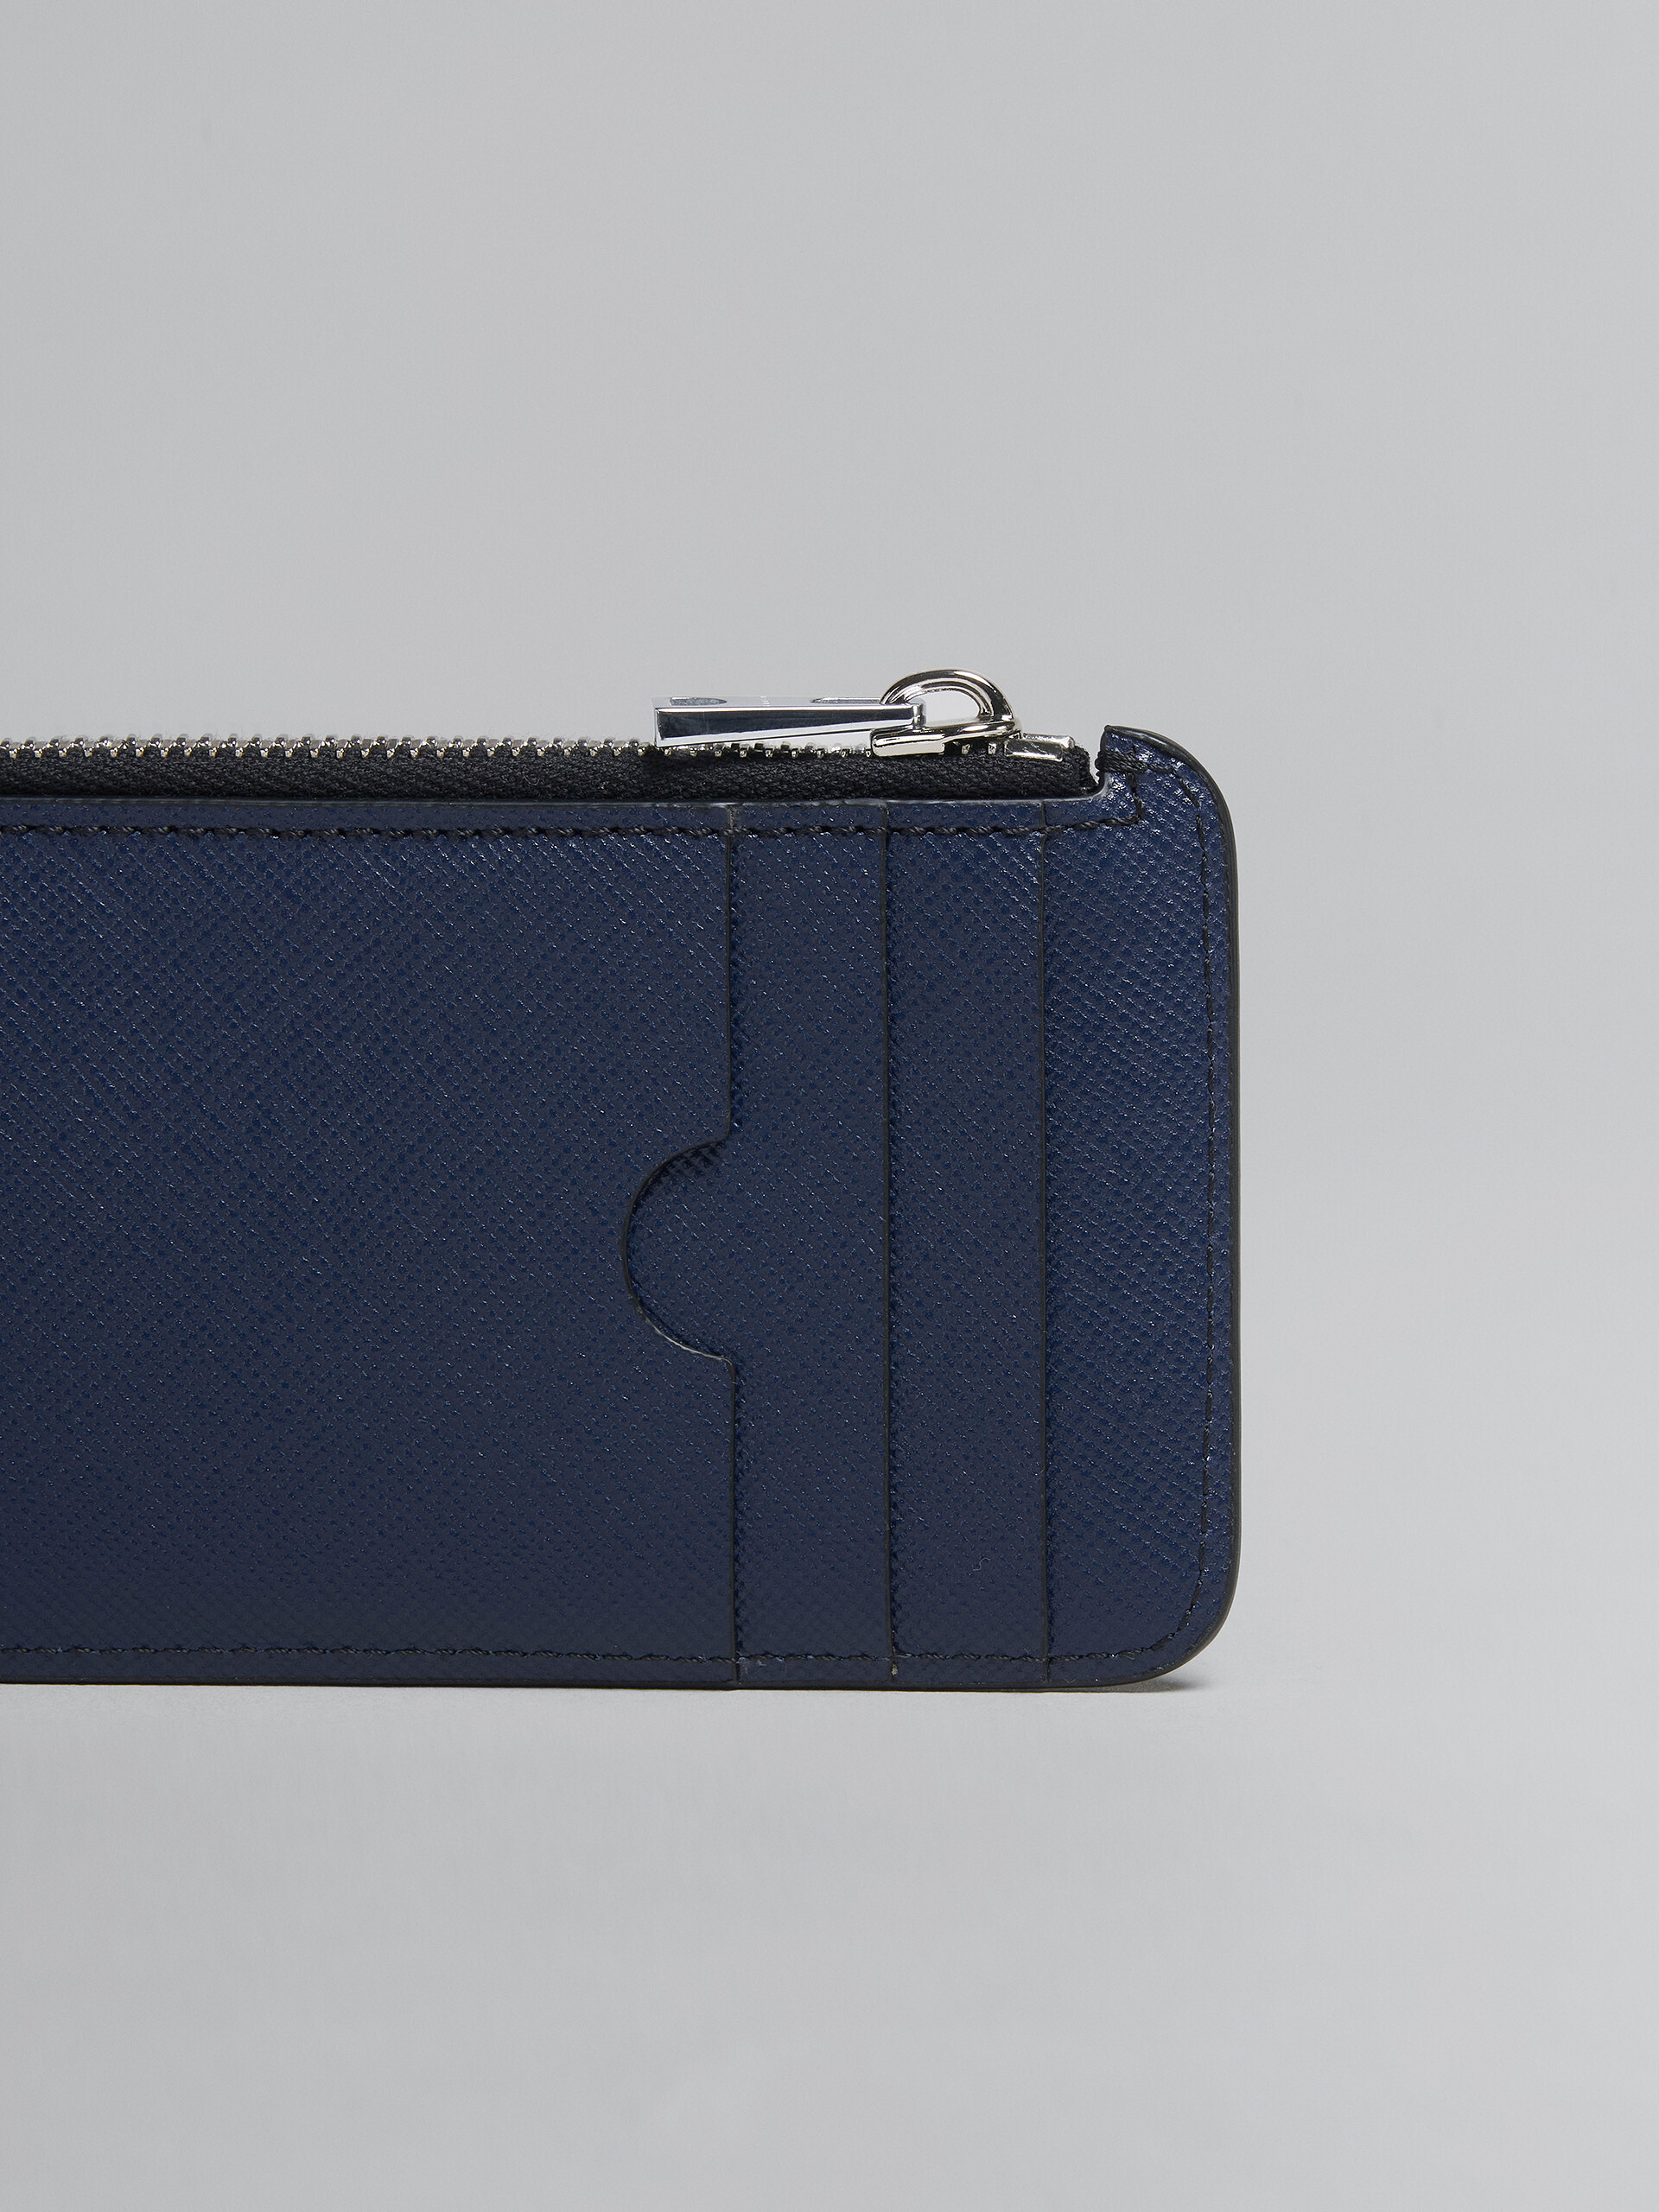 Blue and black saffiano leather zip-around card case